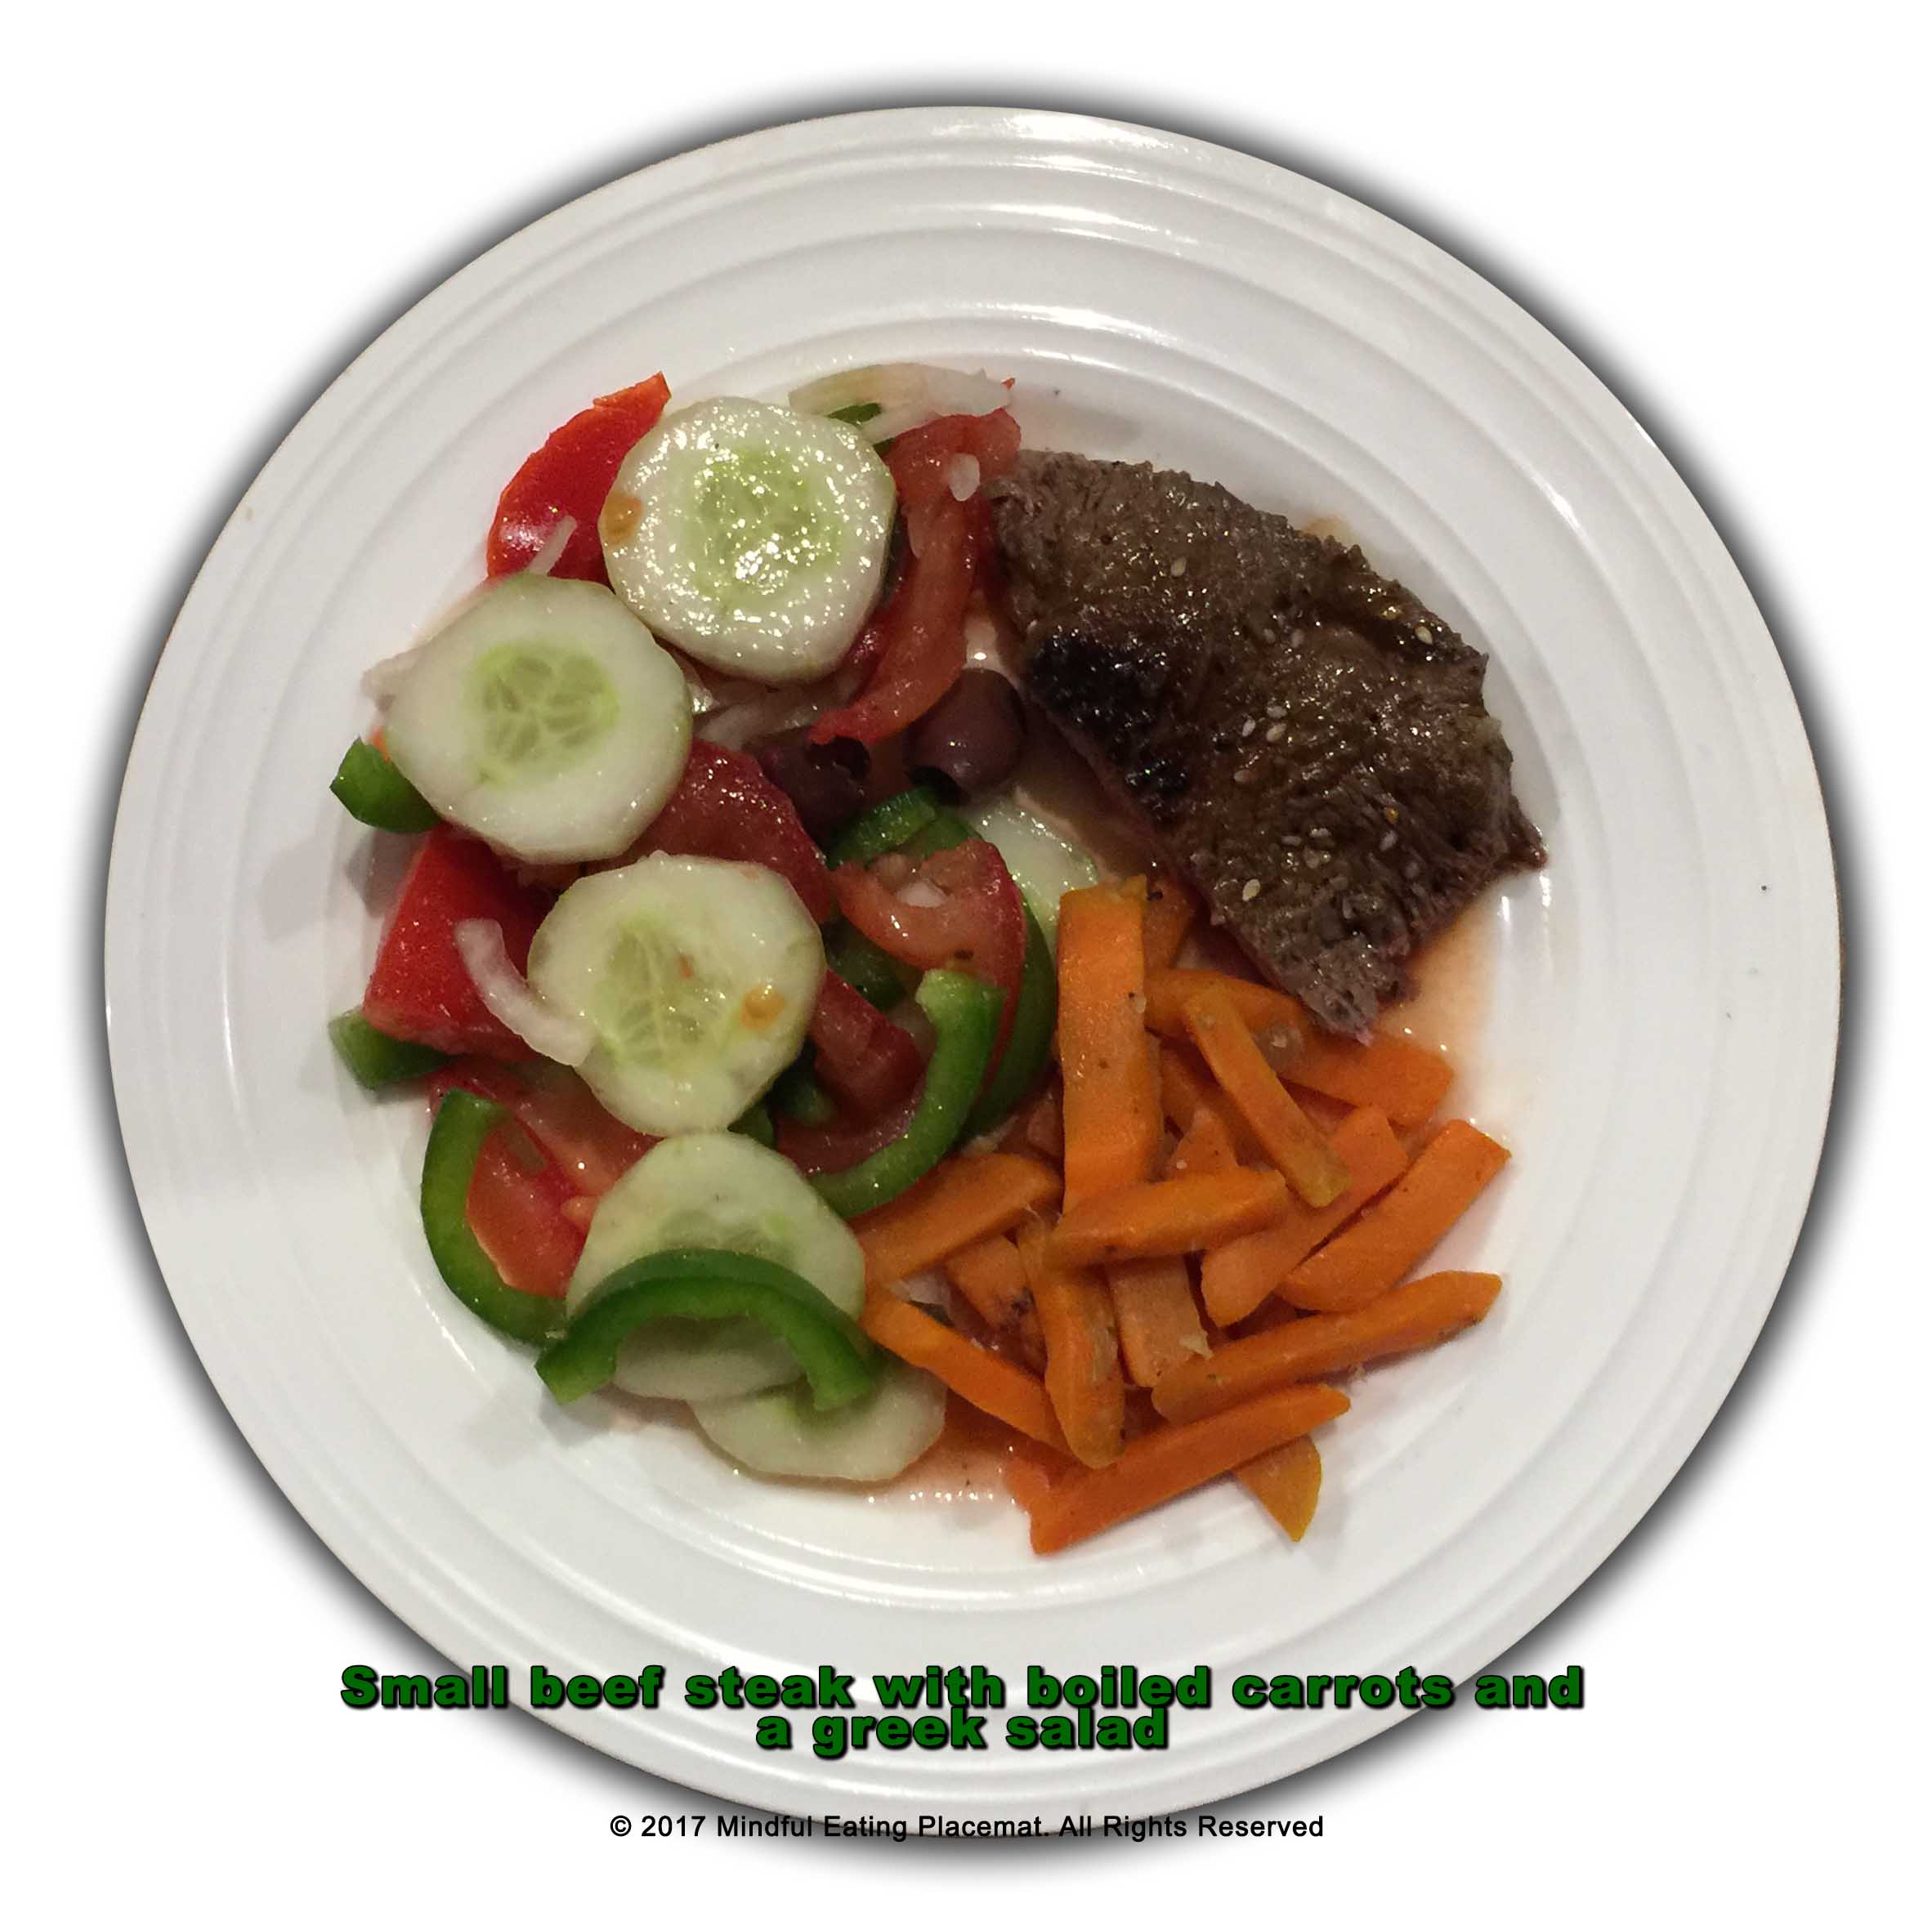 Small beef steak with boiled carrots and a greek salad